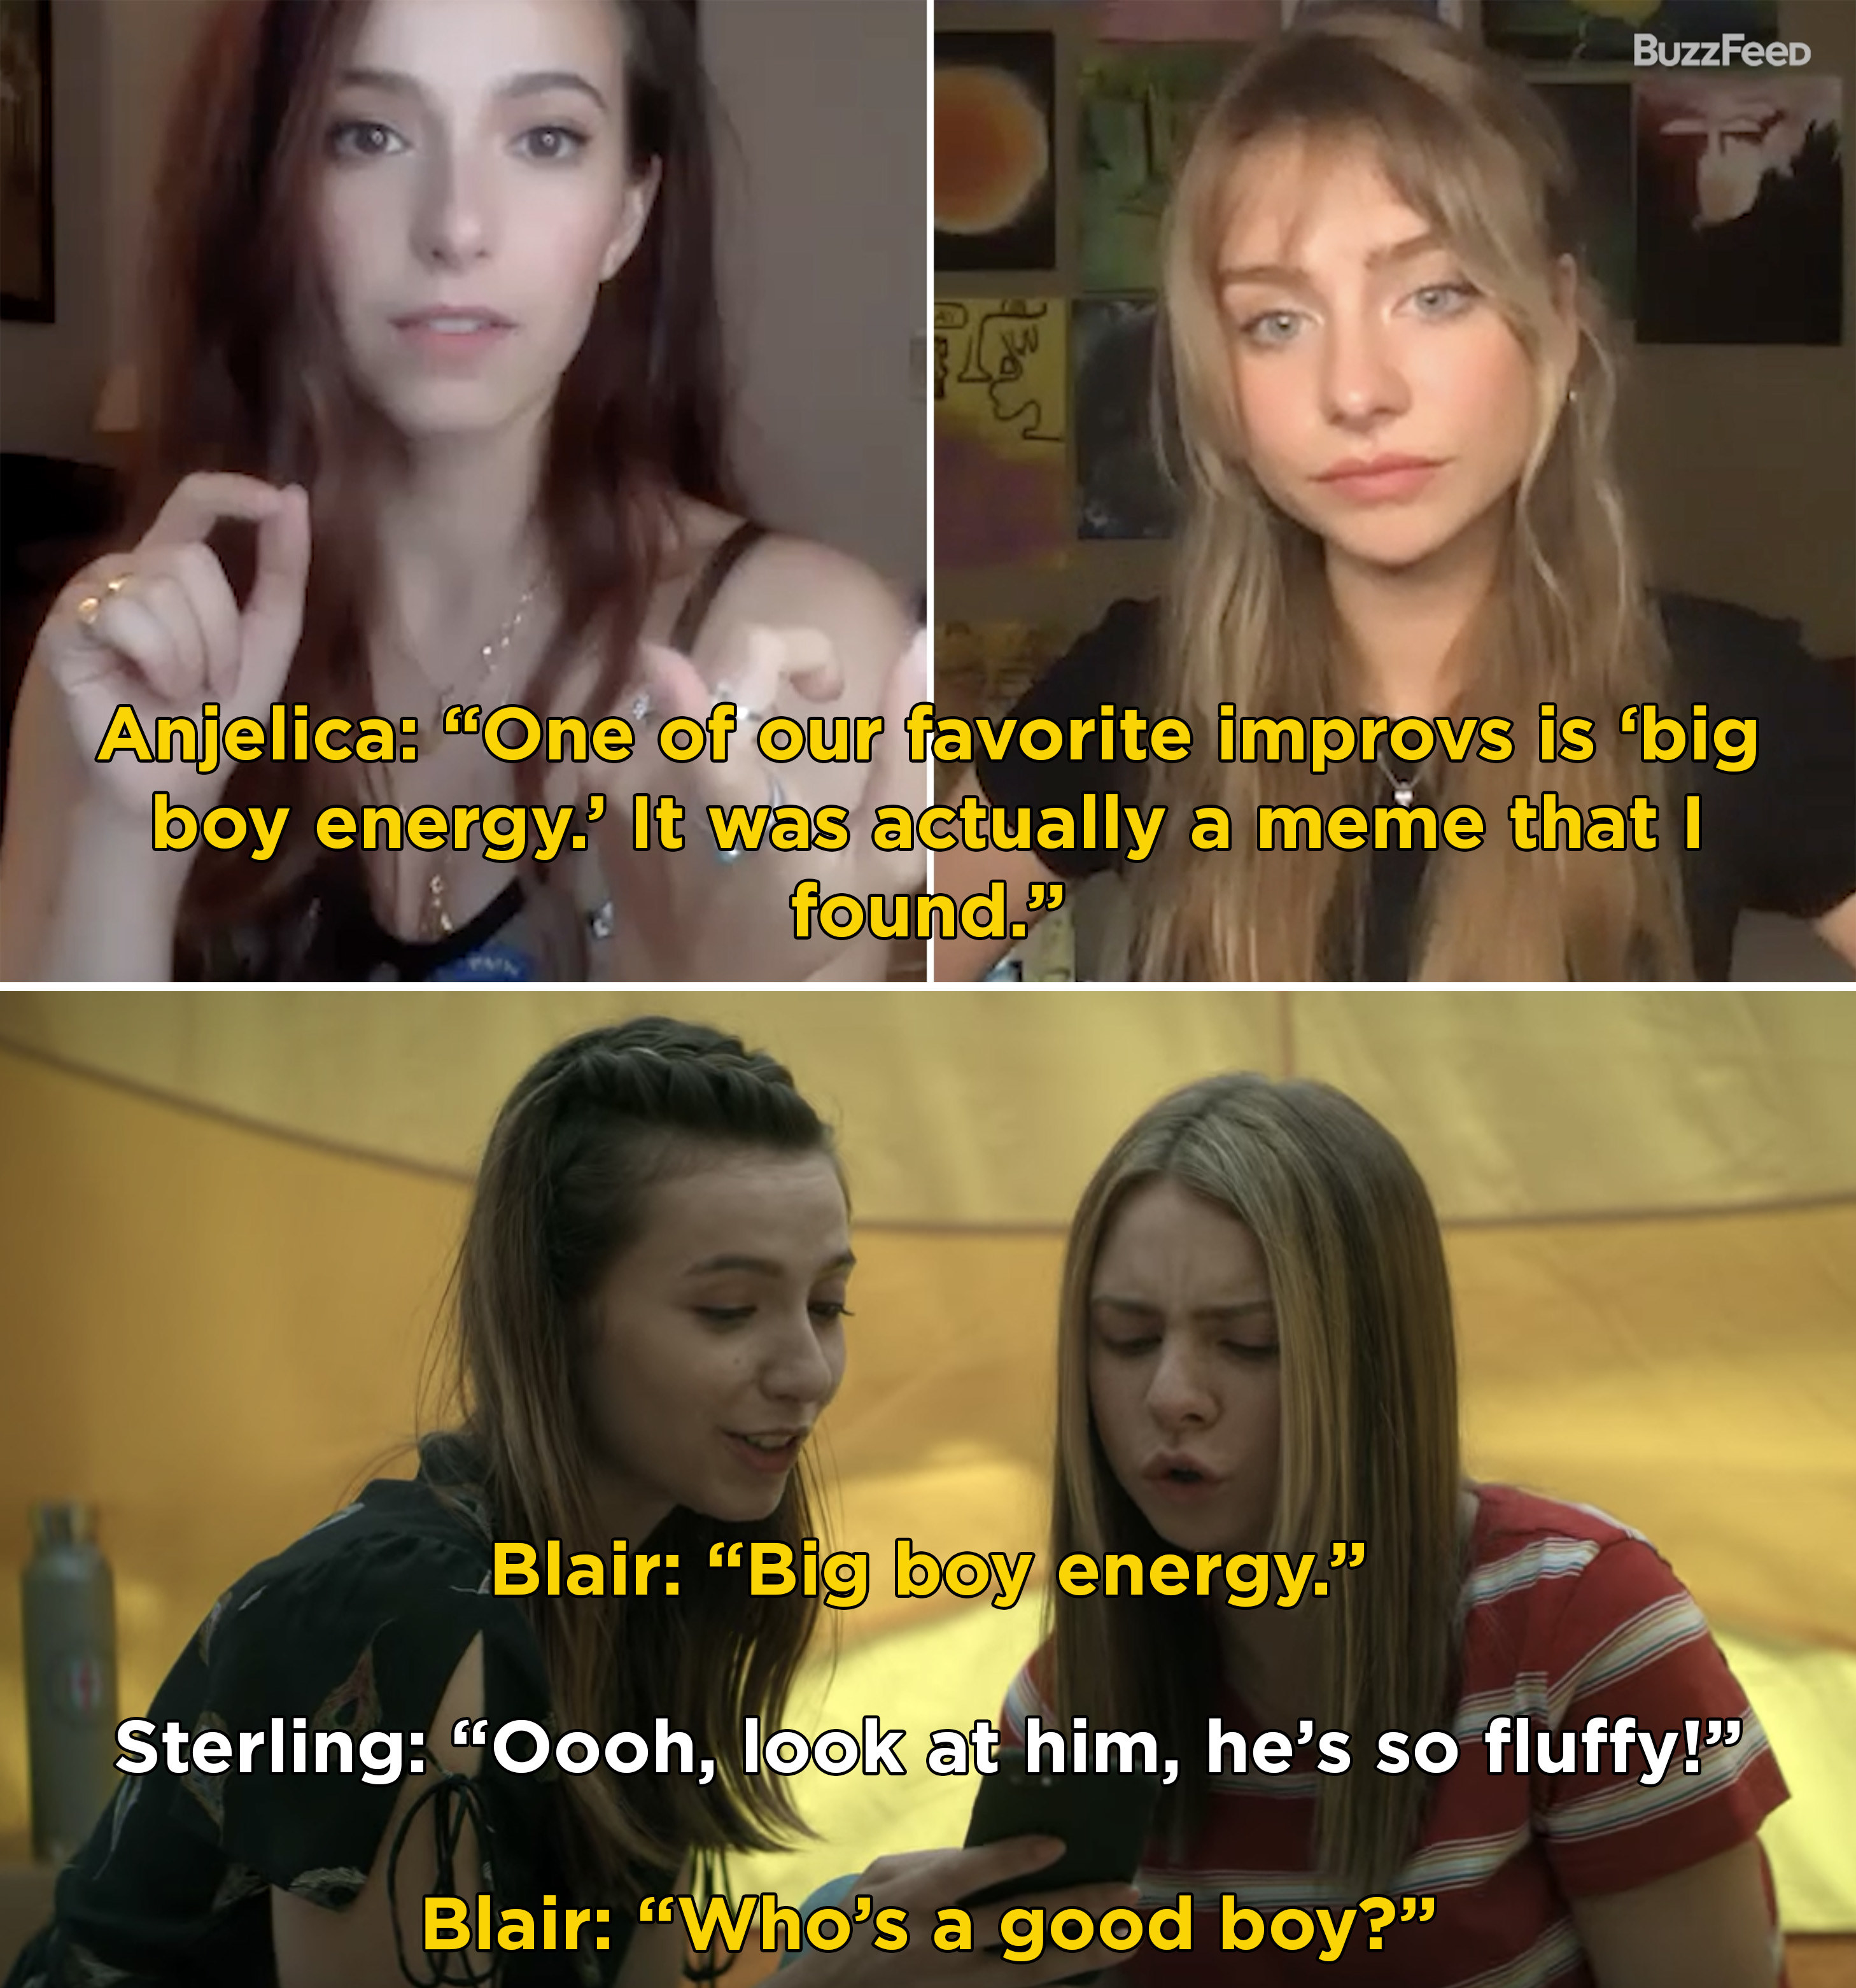 Anjelica saying that she actually found the &#x27;big boy energy&#x27; meme that is featured in the show